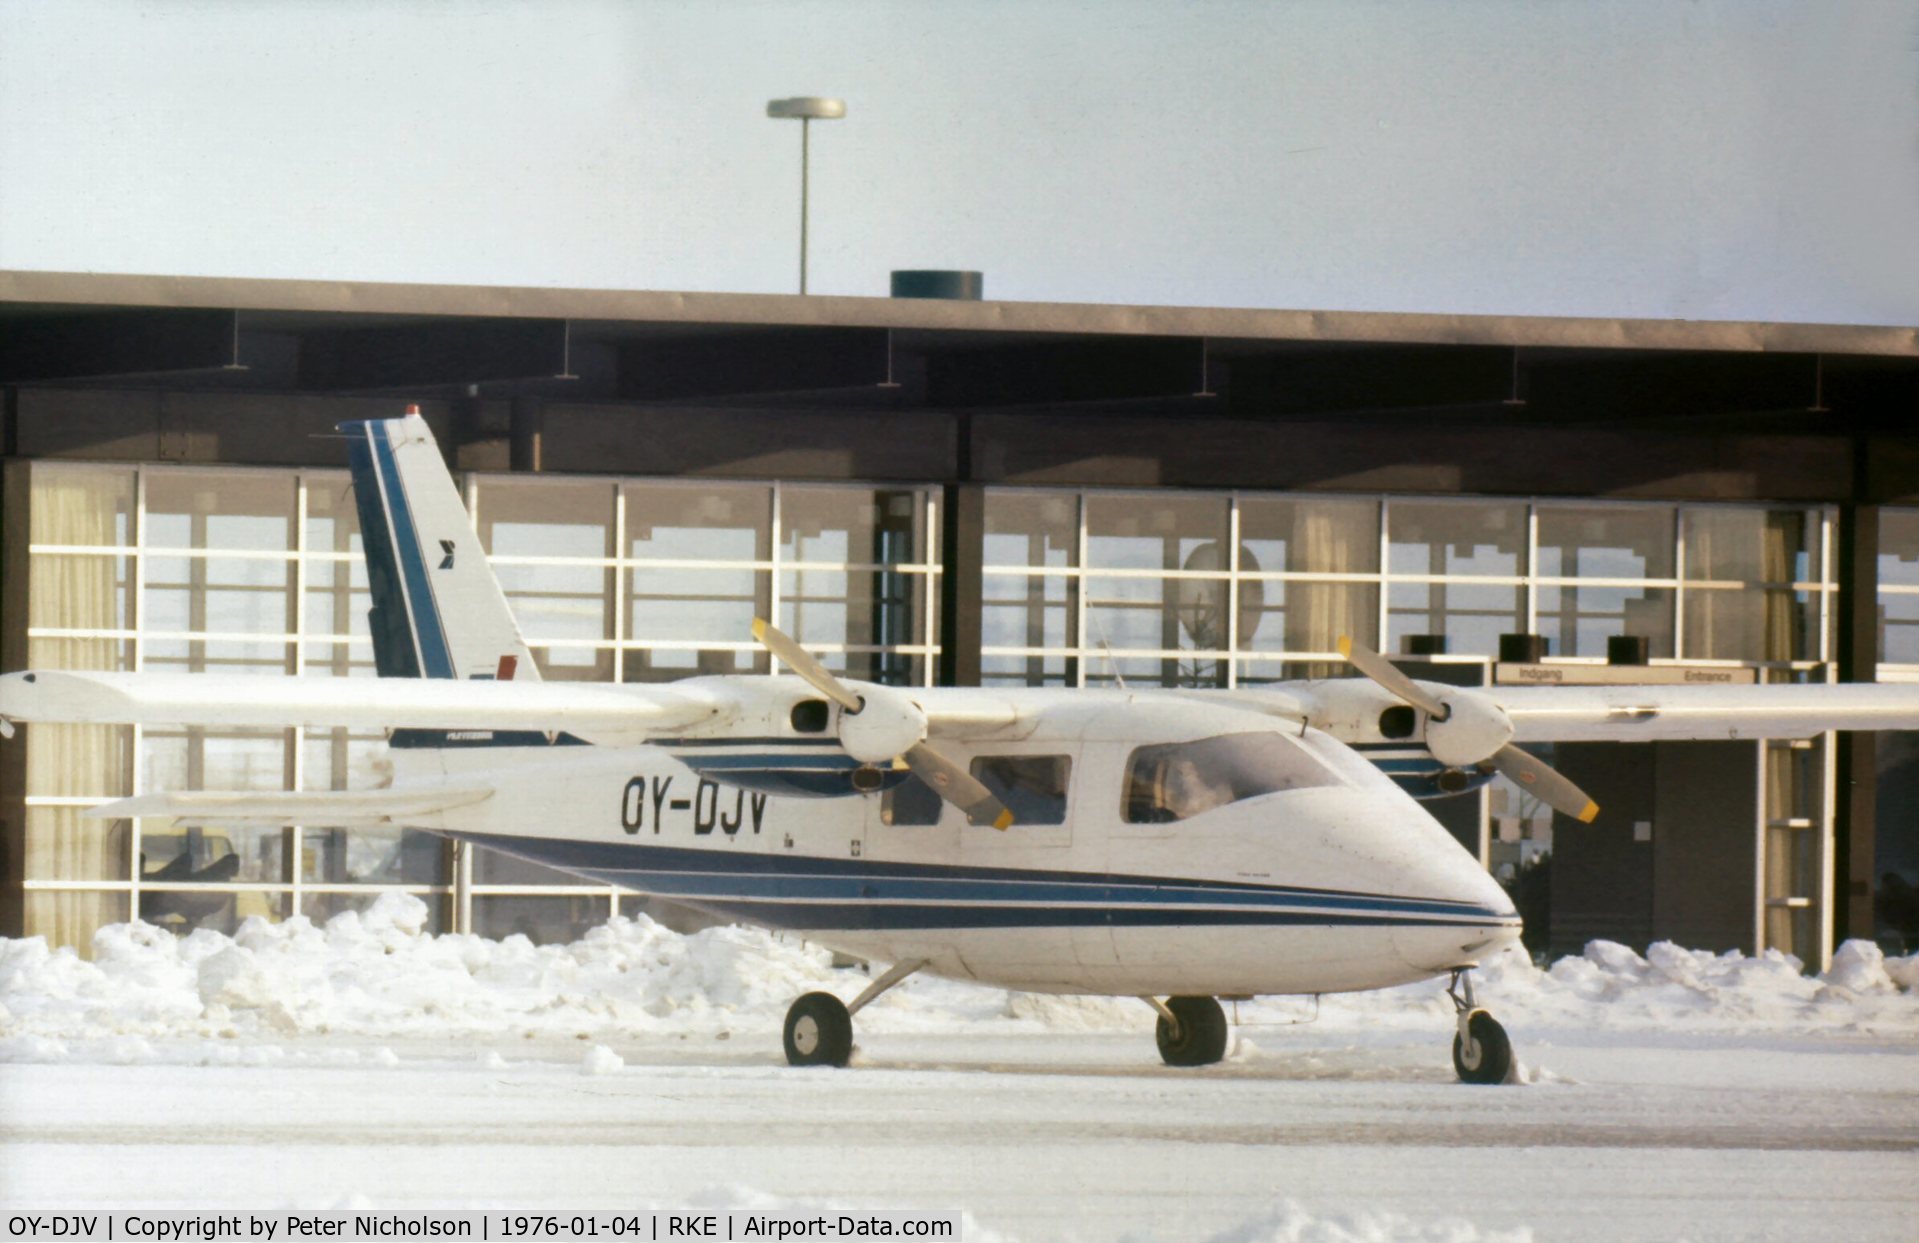 OY-DJV, 1974 Partenavia P-68B C/N 22, Operated by Delta Fly when seen at Roskilde in January 1976.